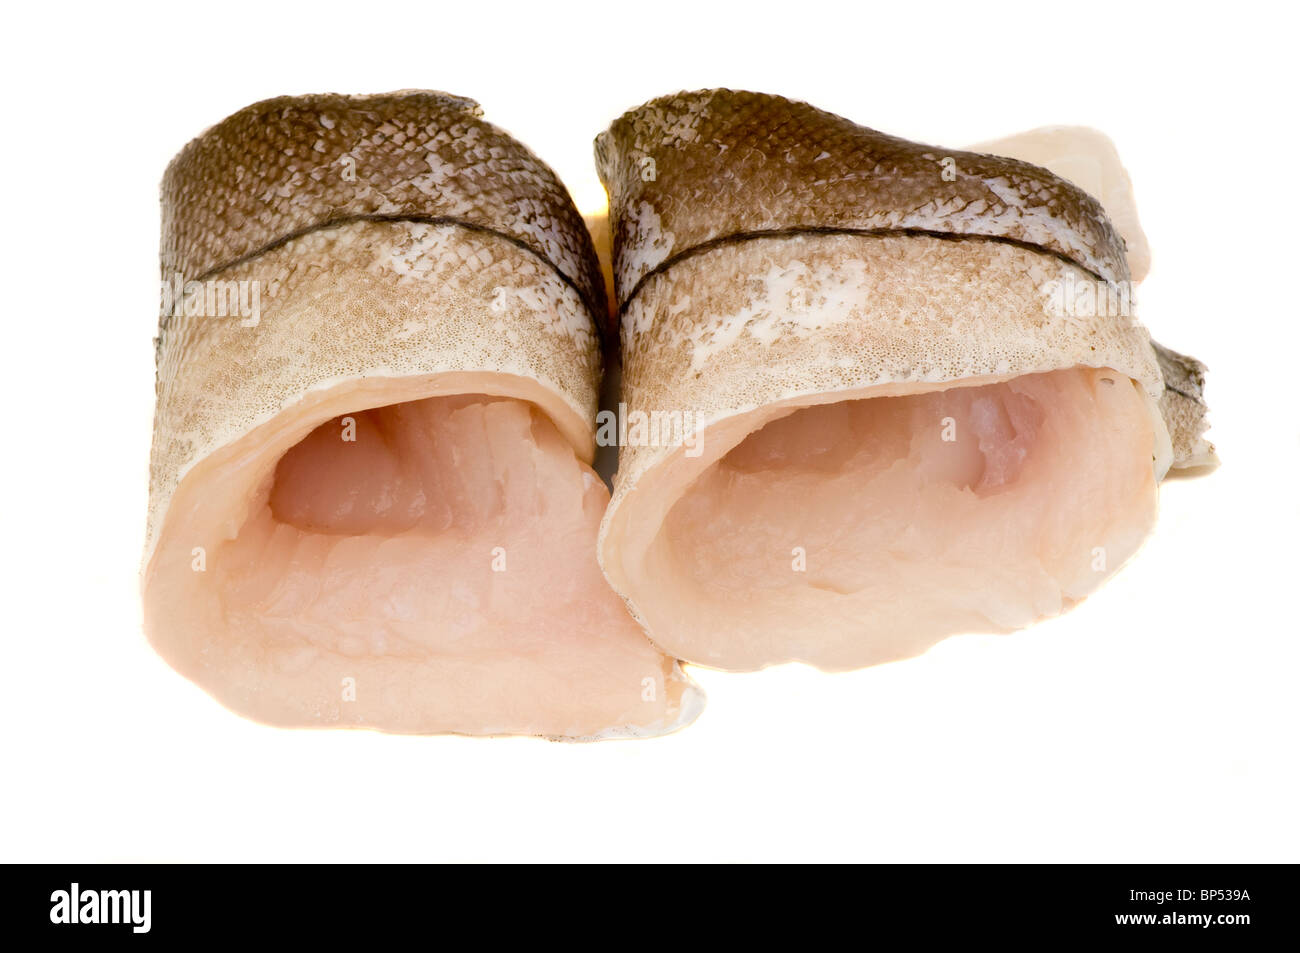 Two Rolled Up Plaice Fillets Stock Photo